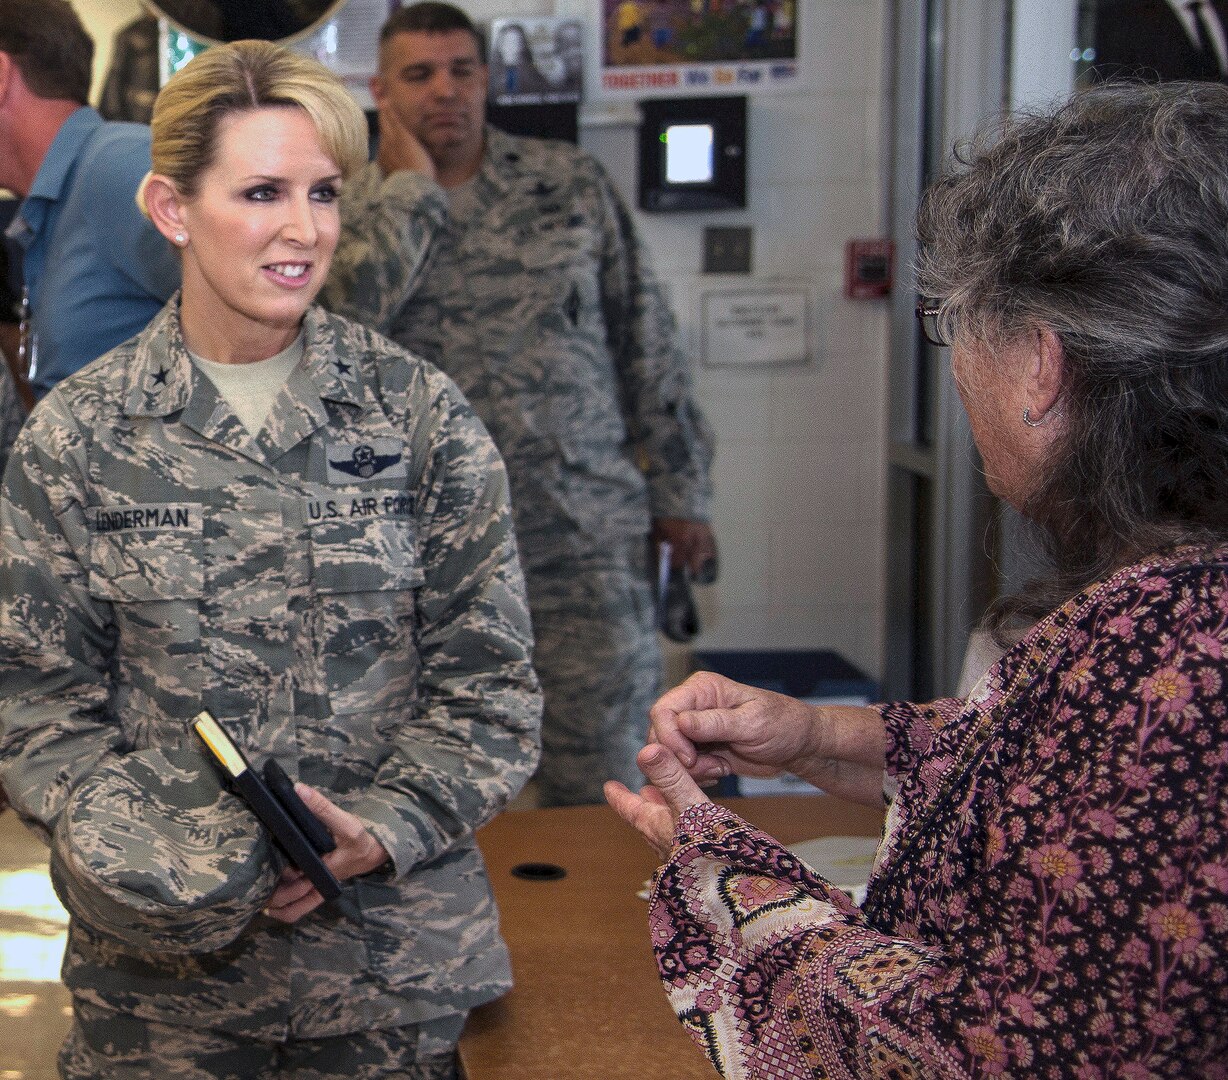 Brig. Gen. Laura L. Lenderman (left)), 502nd Air Base Wing and Joint Base San Antonio commander, talks with Jeanne Warren (right), JBSA-Fort Sam Houston Youth Director, during a stop at the JBSA-Fort Sam Houston Youth Center June 15. The general visited the center as part of an immersion tour, which included stops at the Academic Support Center, Student Activity Center, the vehicle maintenance facility, Jimmy Brought Fitness Center, and Military & Family Readiness Center.